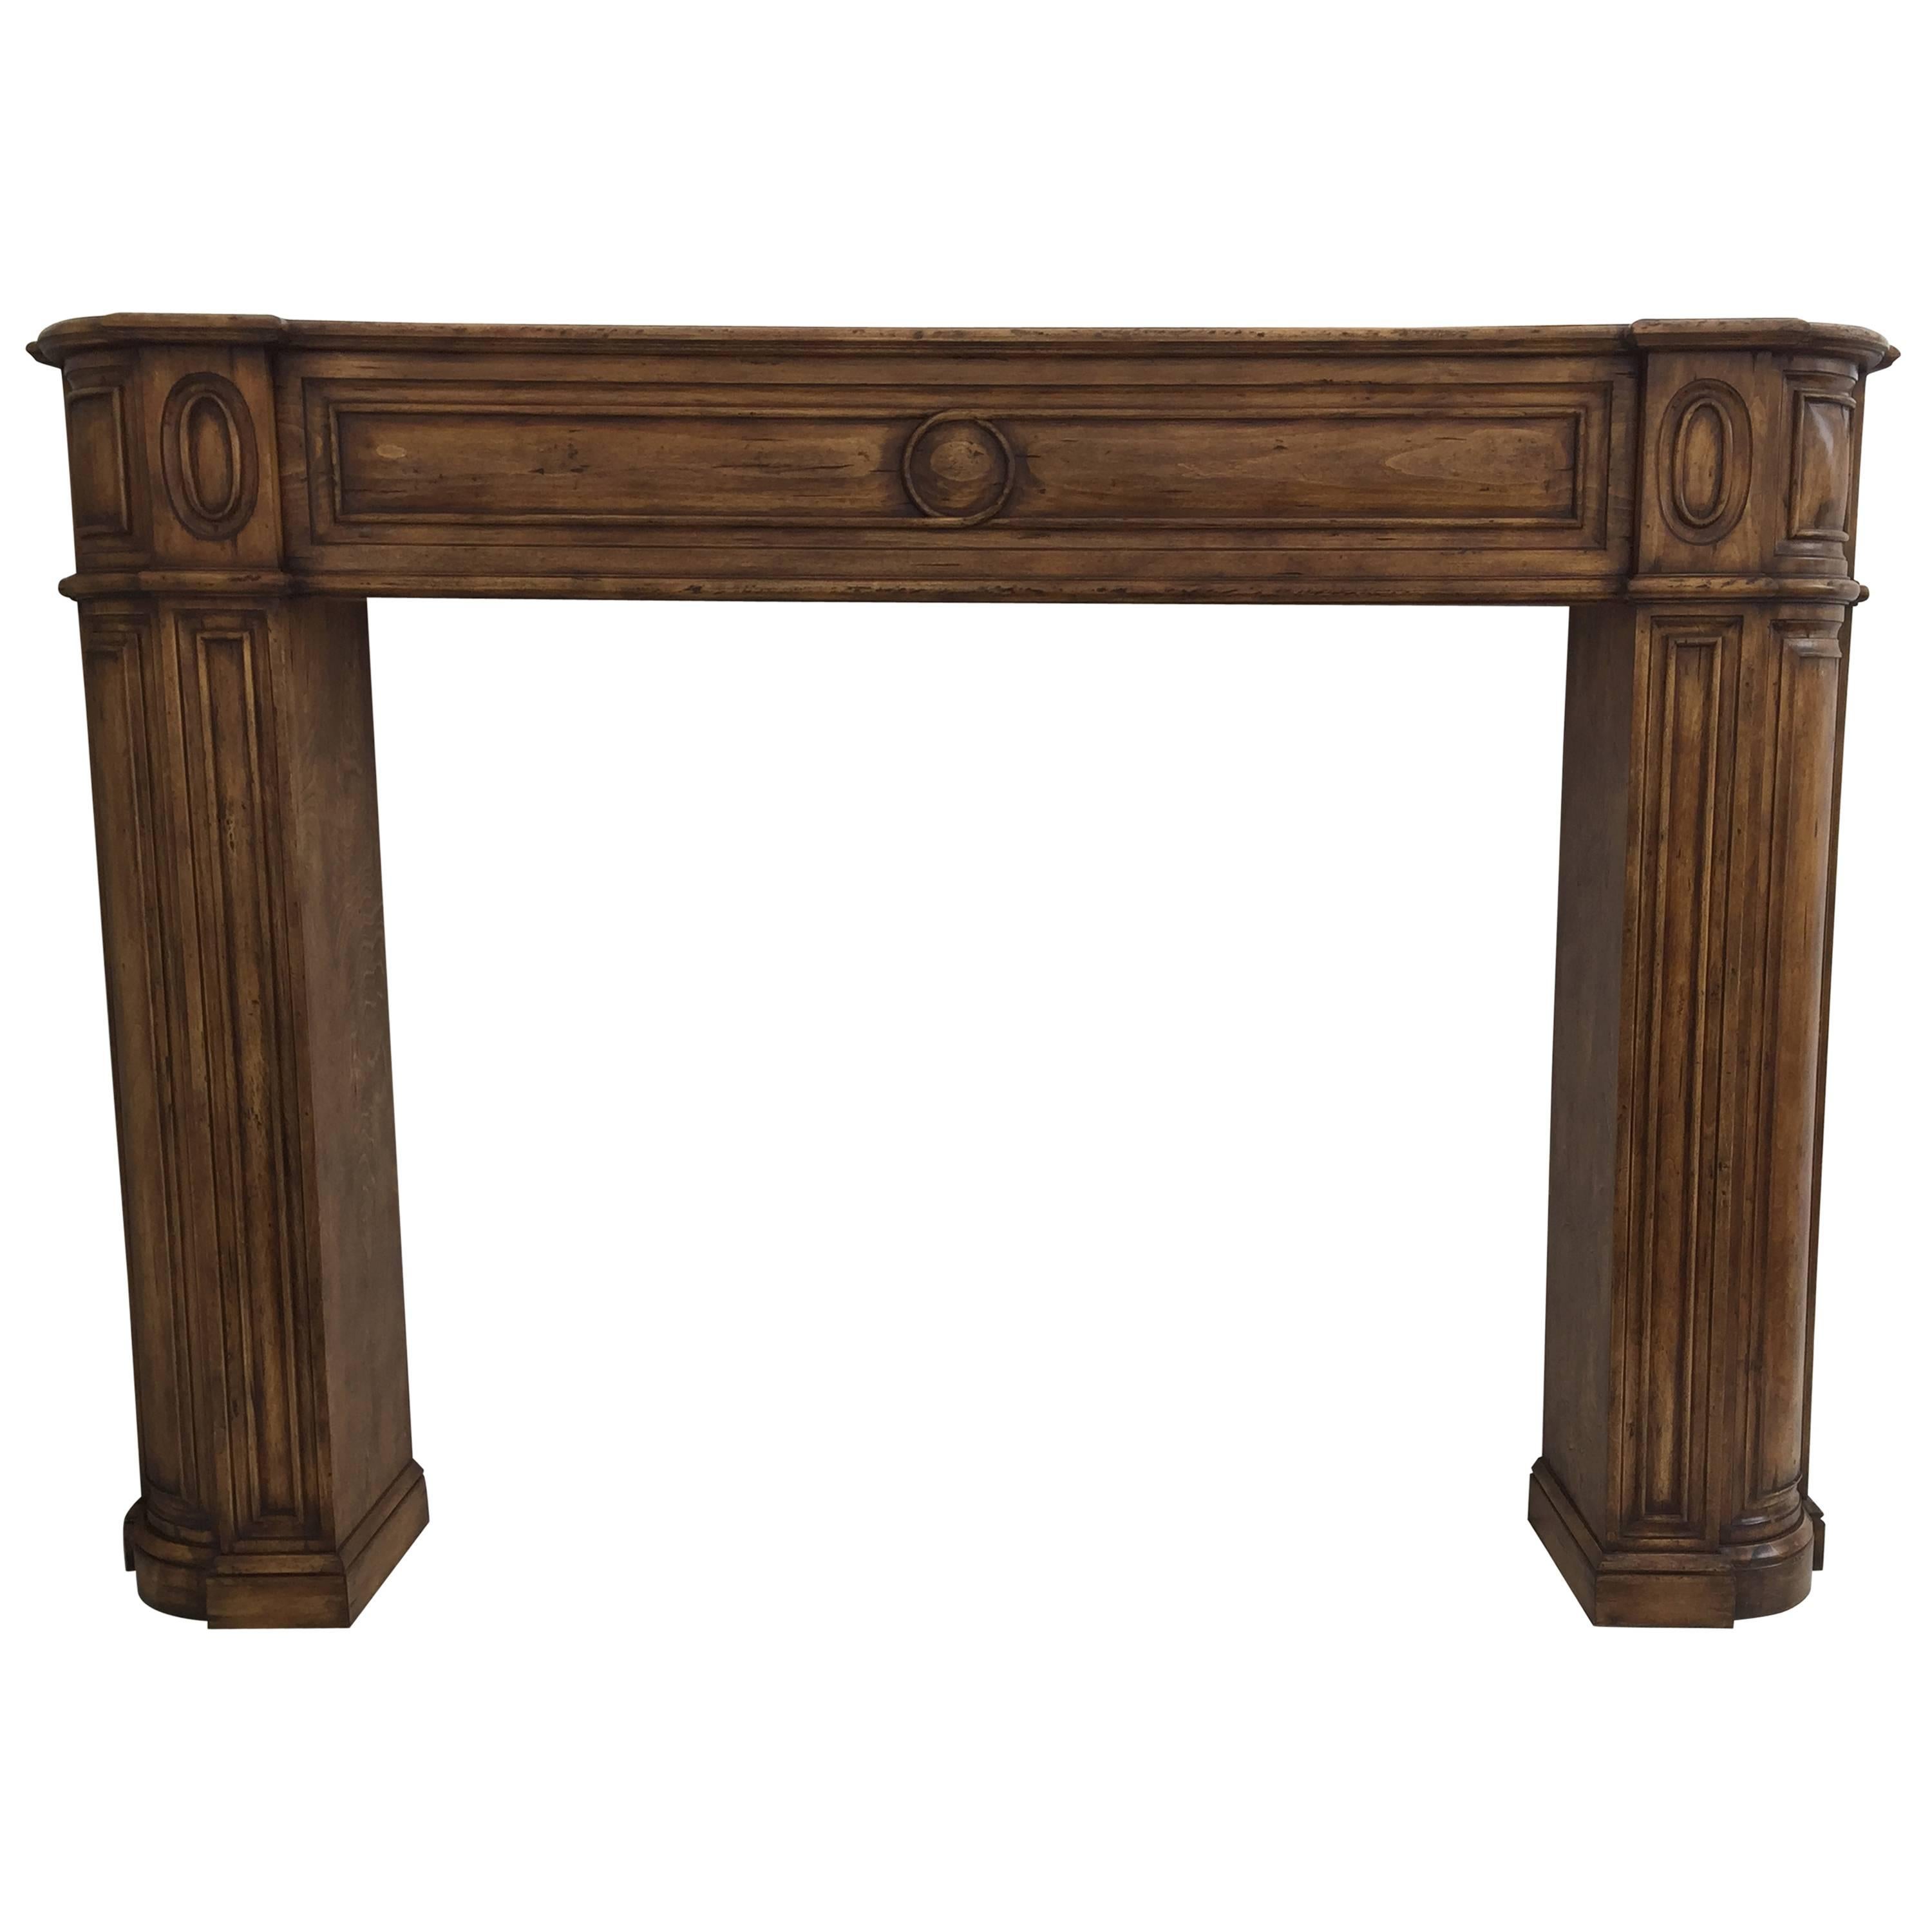 Carved Architectural Fireplace Mantel